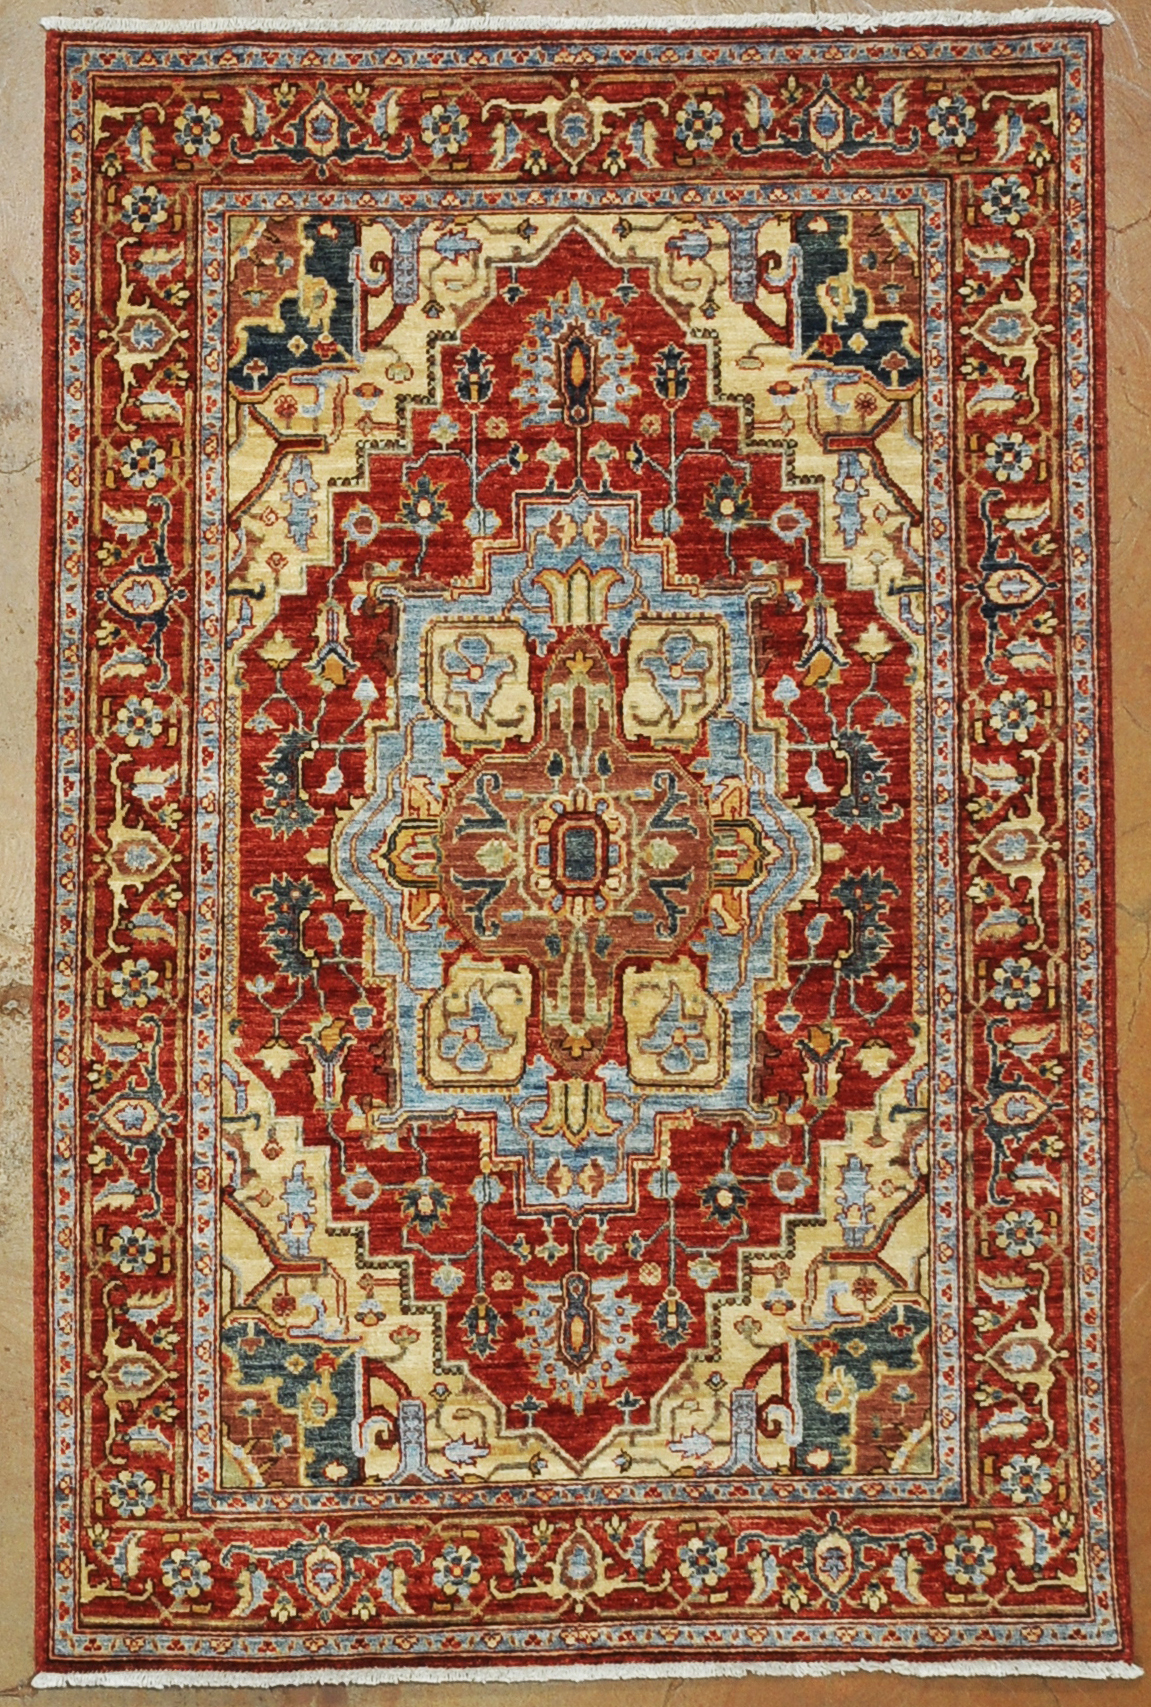 Ziegler & co Tribal rugs and more -